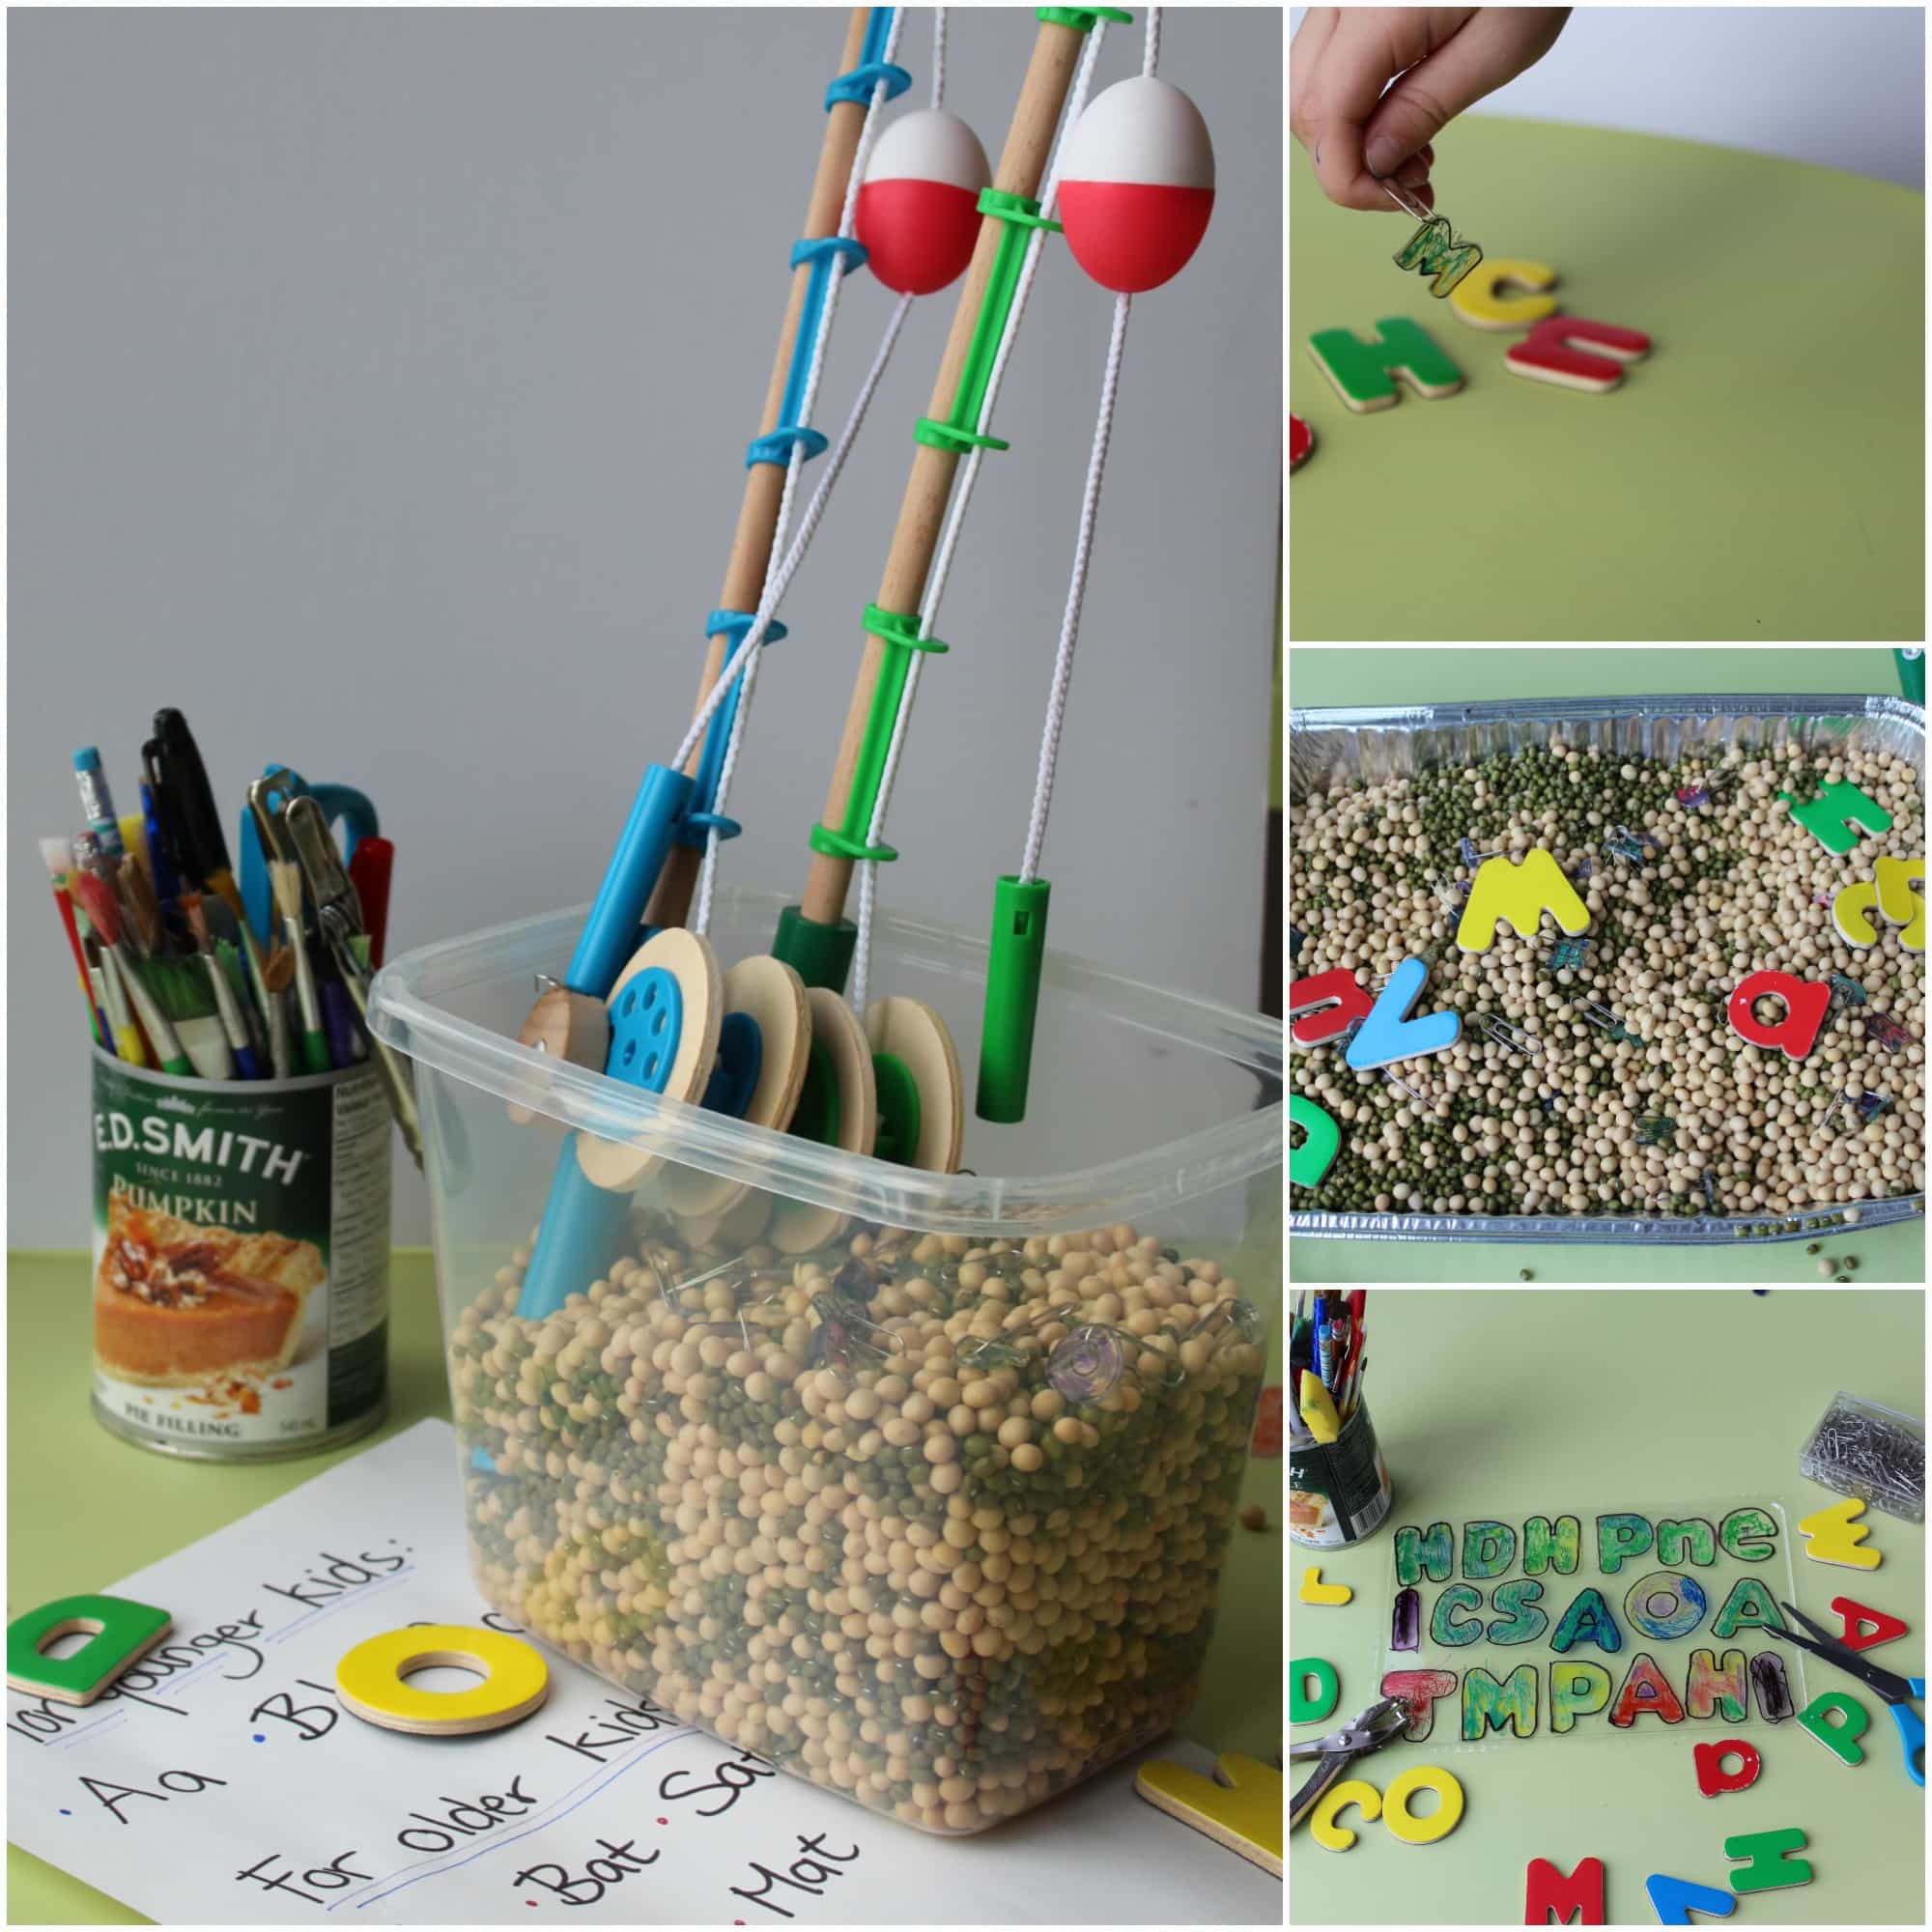 Promote early literacy and play-based learning with this fishing sight word sensory bin. Perfect for early childhood education, sensory play, developing fine motor skills, hand eye coordination, letter recognition, learning the alphabet and more.